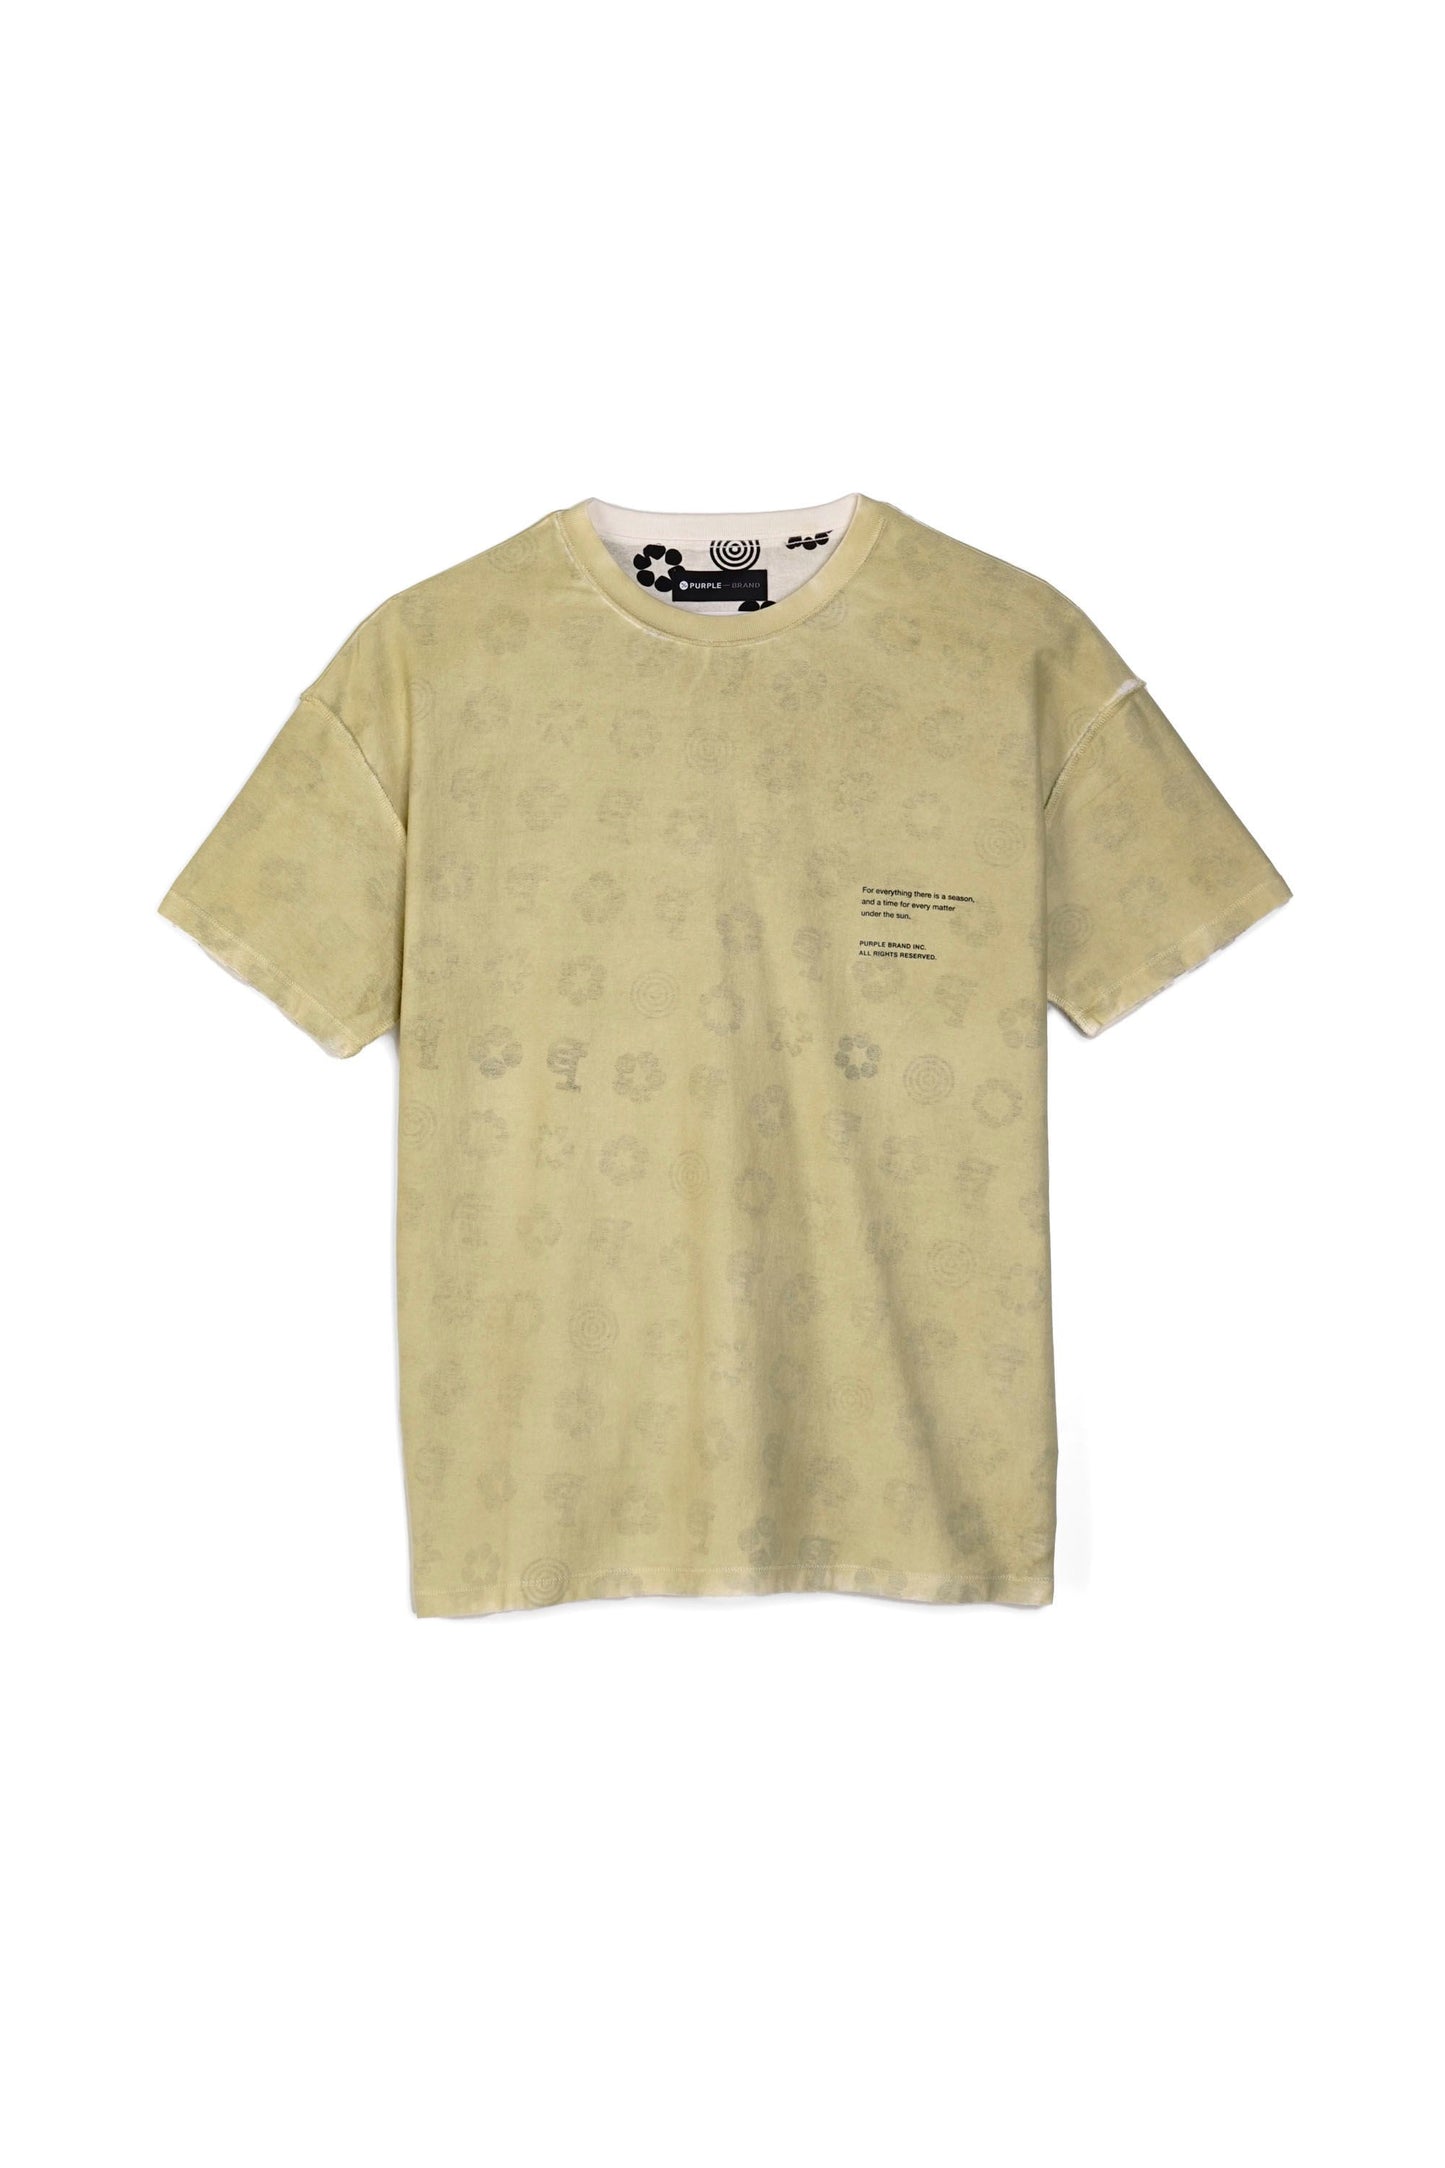 P101 RELAXED FIT TEE - MOSS SPRAY WITH INNER MONOGRAM PRINT